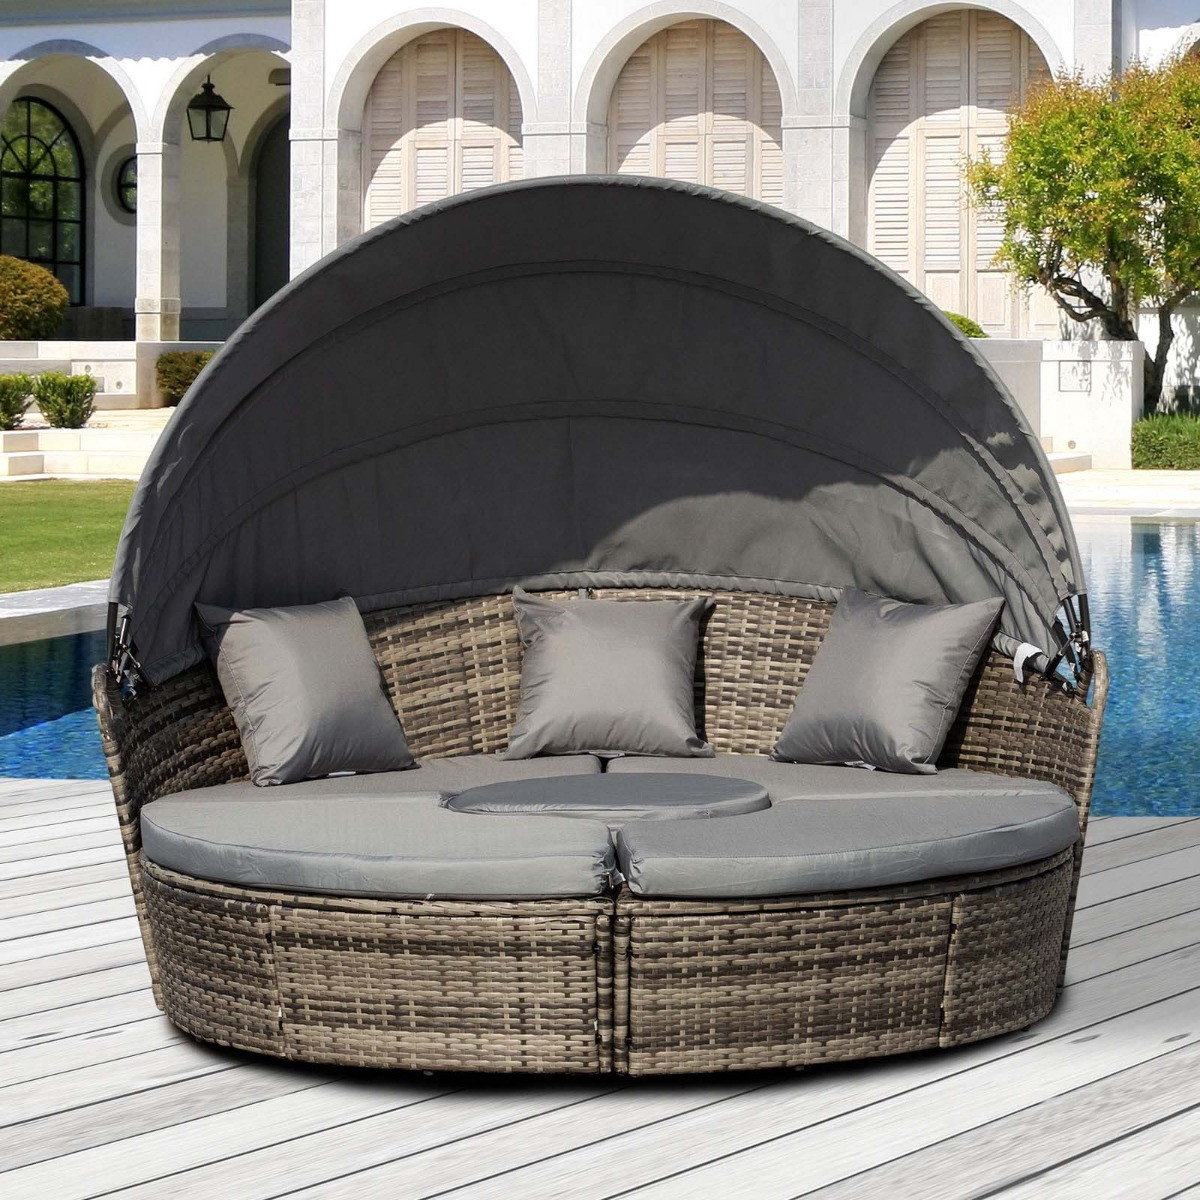 Outsunny Rattan Garden Furniture Cushioned Round Sofa Bed - Grey>